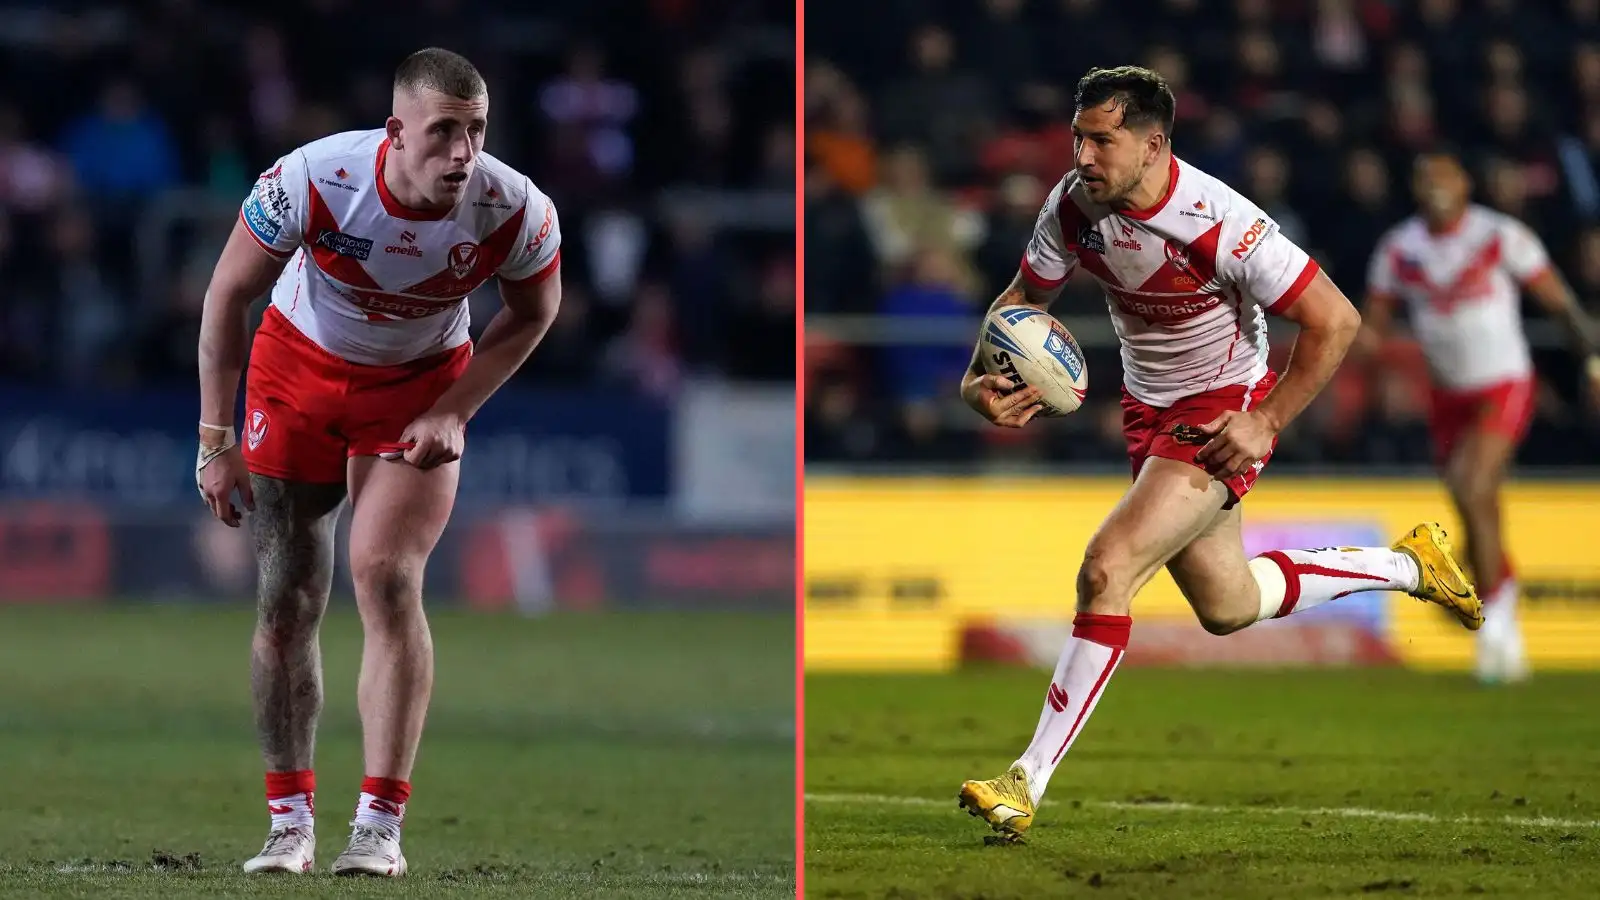 St Helens coach provides injury update on duo ahead of Challenge Cup quarter-final